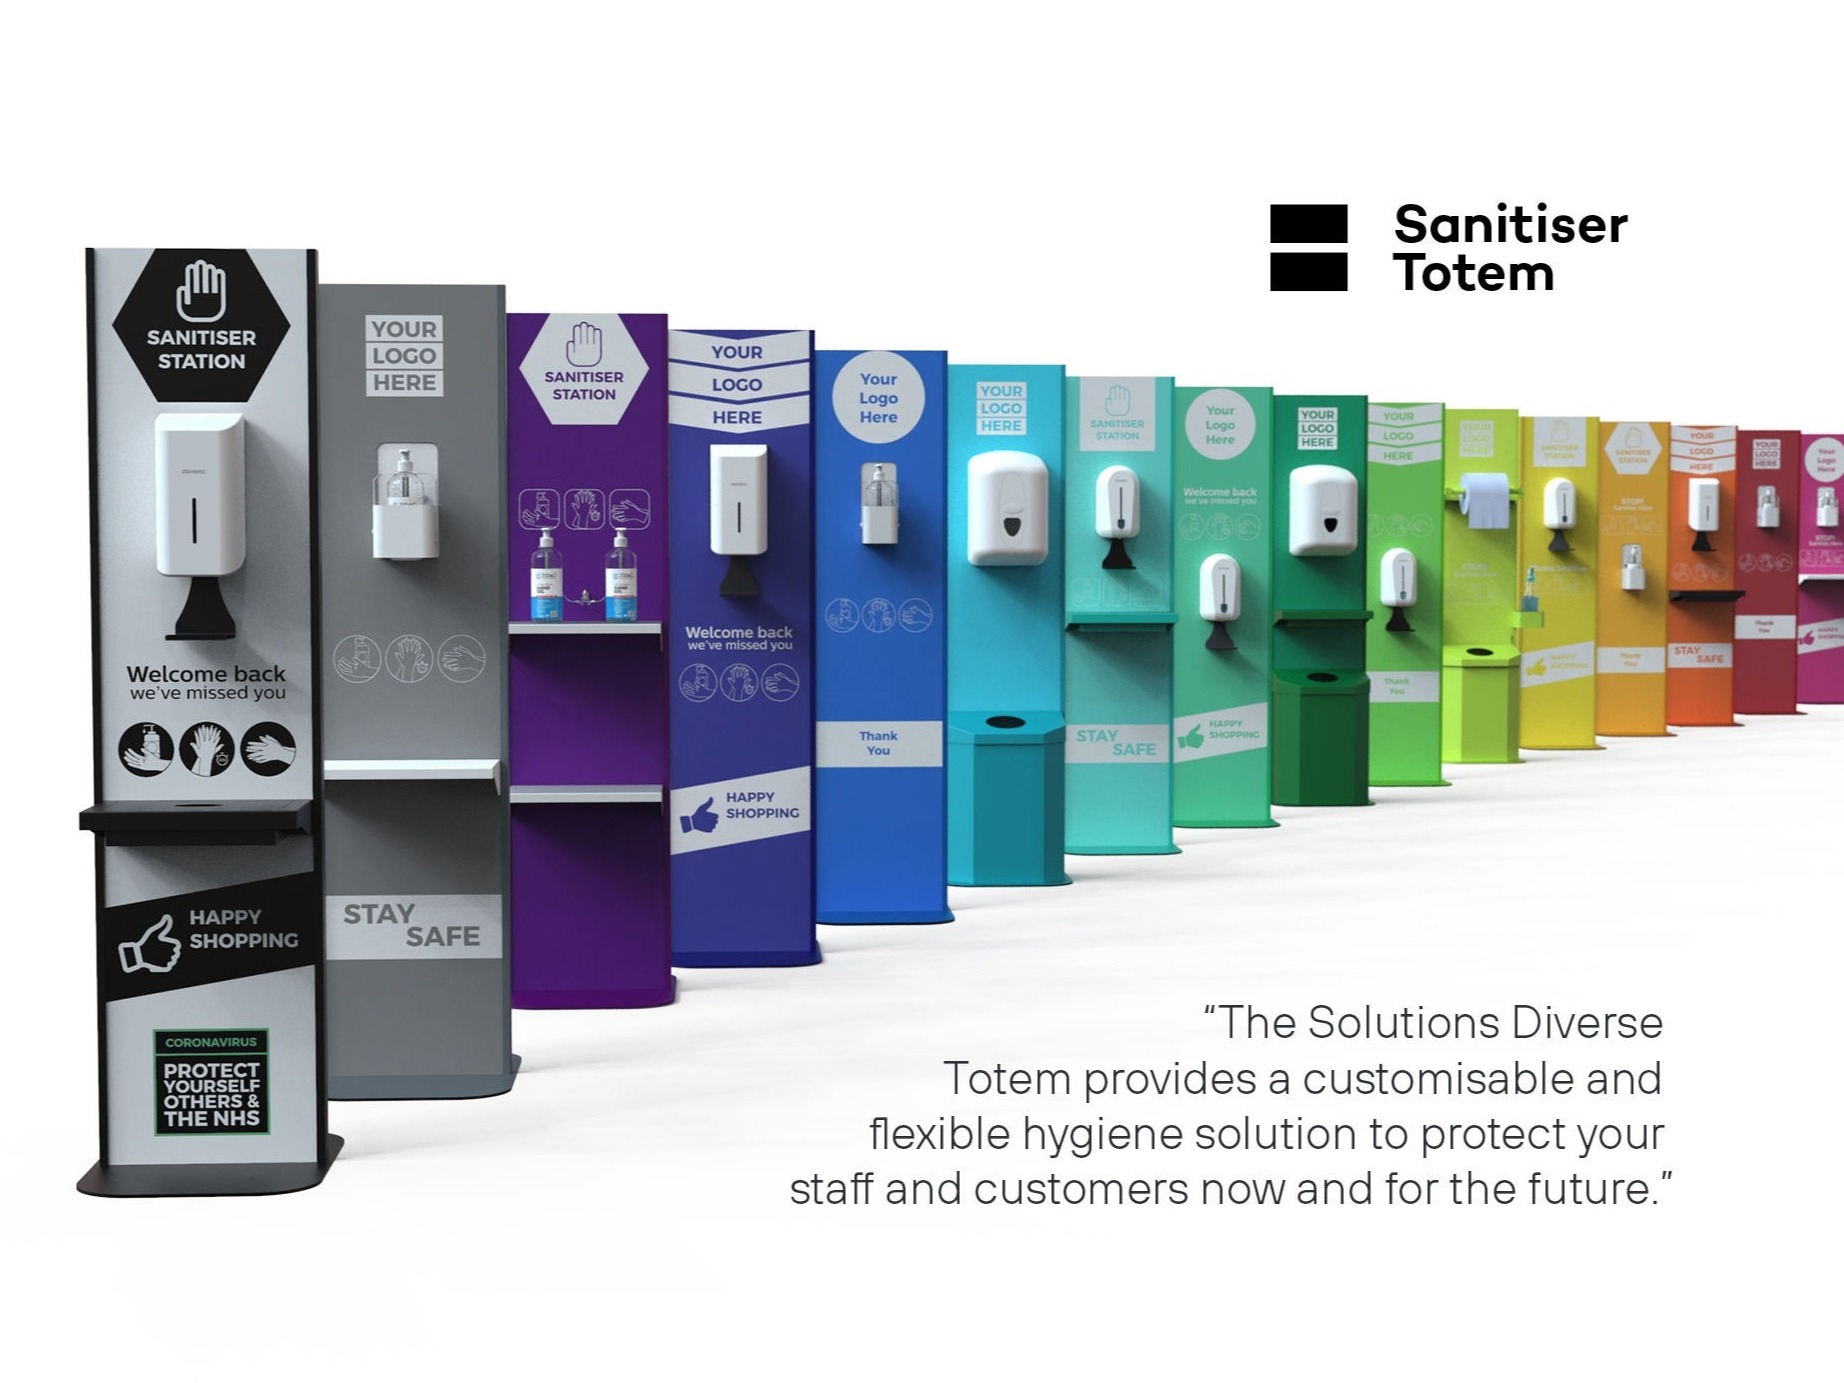 The Solutions Diverse Totem provides a customisable and flexible hygiene solution to protect your staff and customers now and for the future.